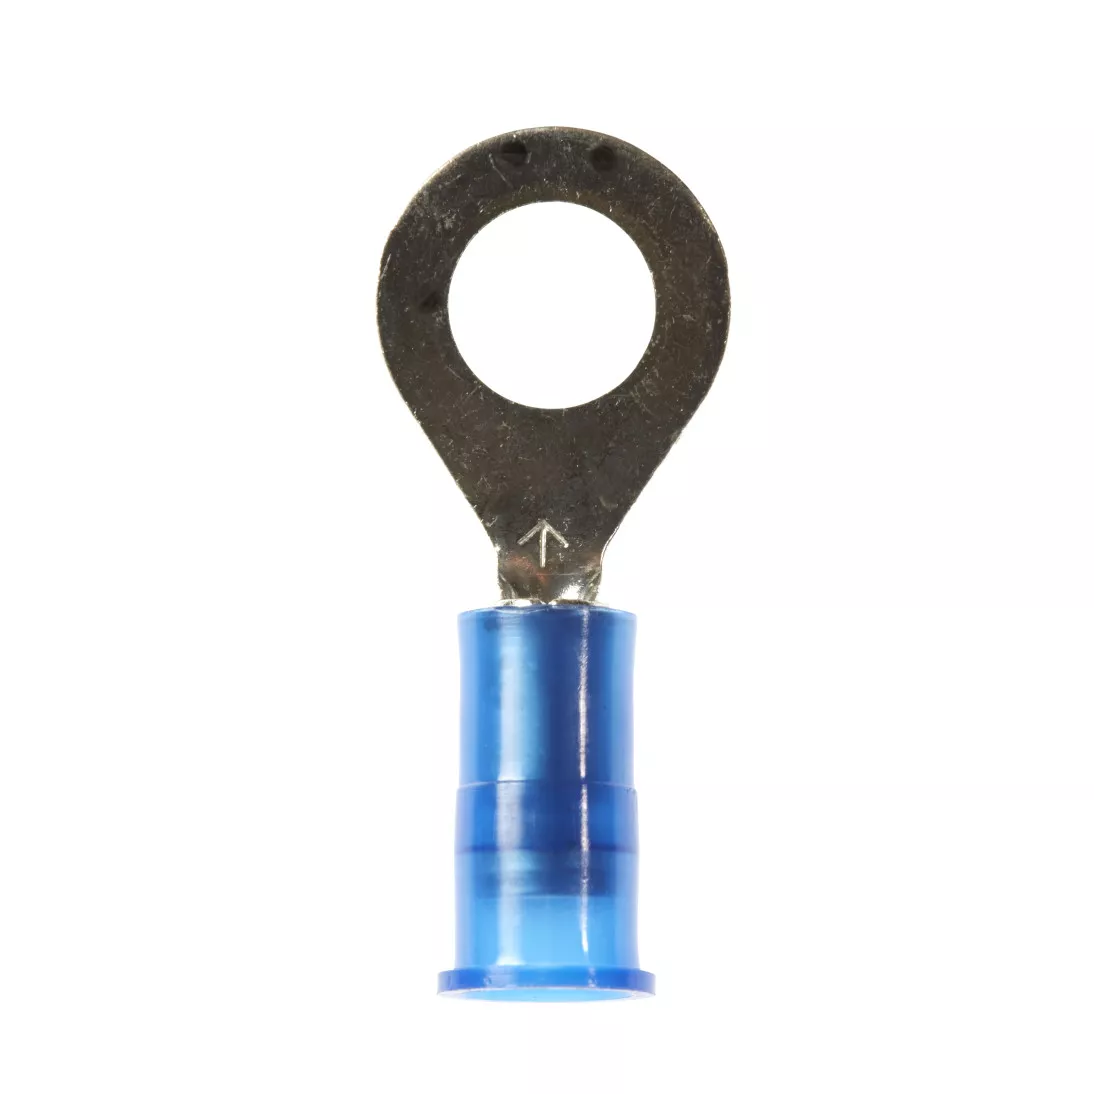 3M™ Scotchlok™ Ring Tongue, Nylon Insulated w/Insulation Grip
MNG14-14R/SK, Stud Size 1/4, 1000/Case